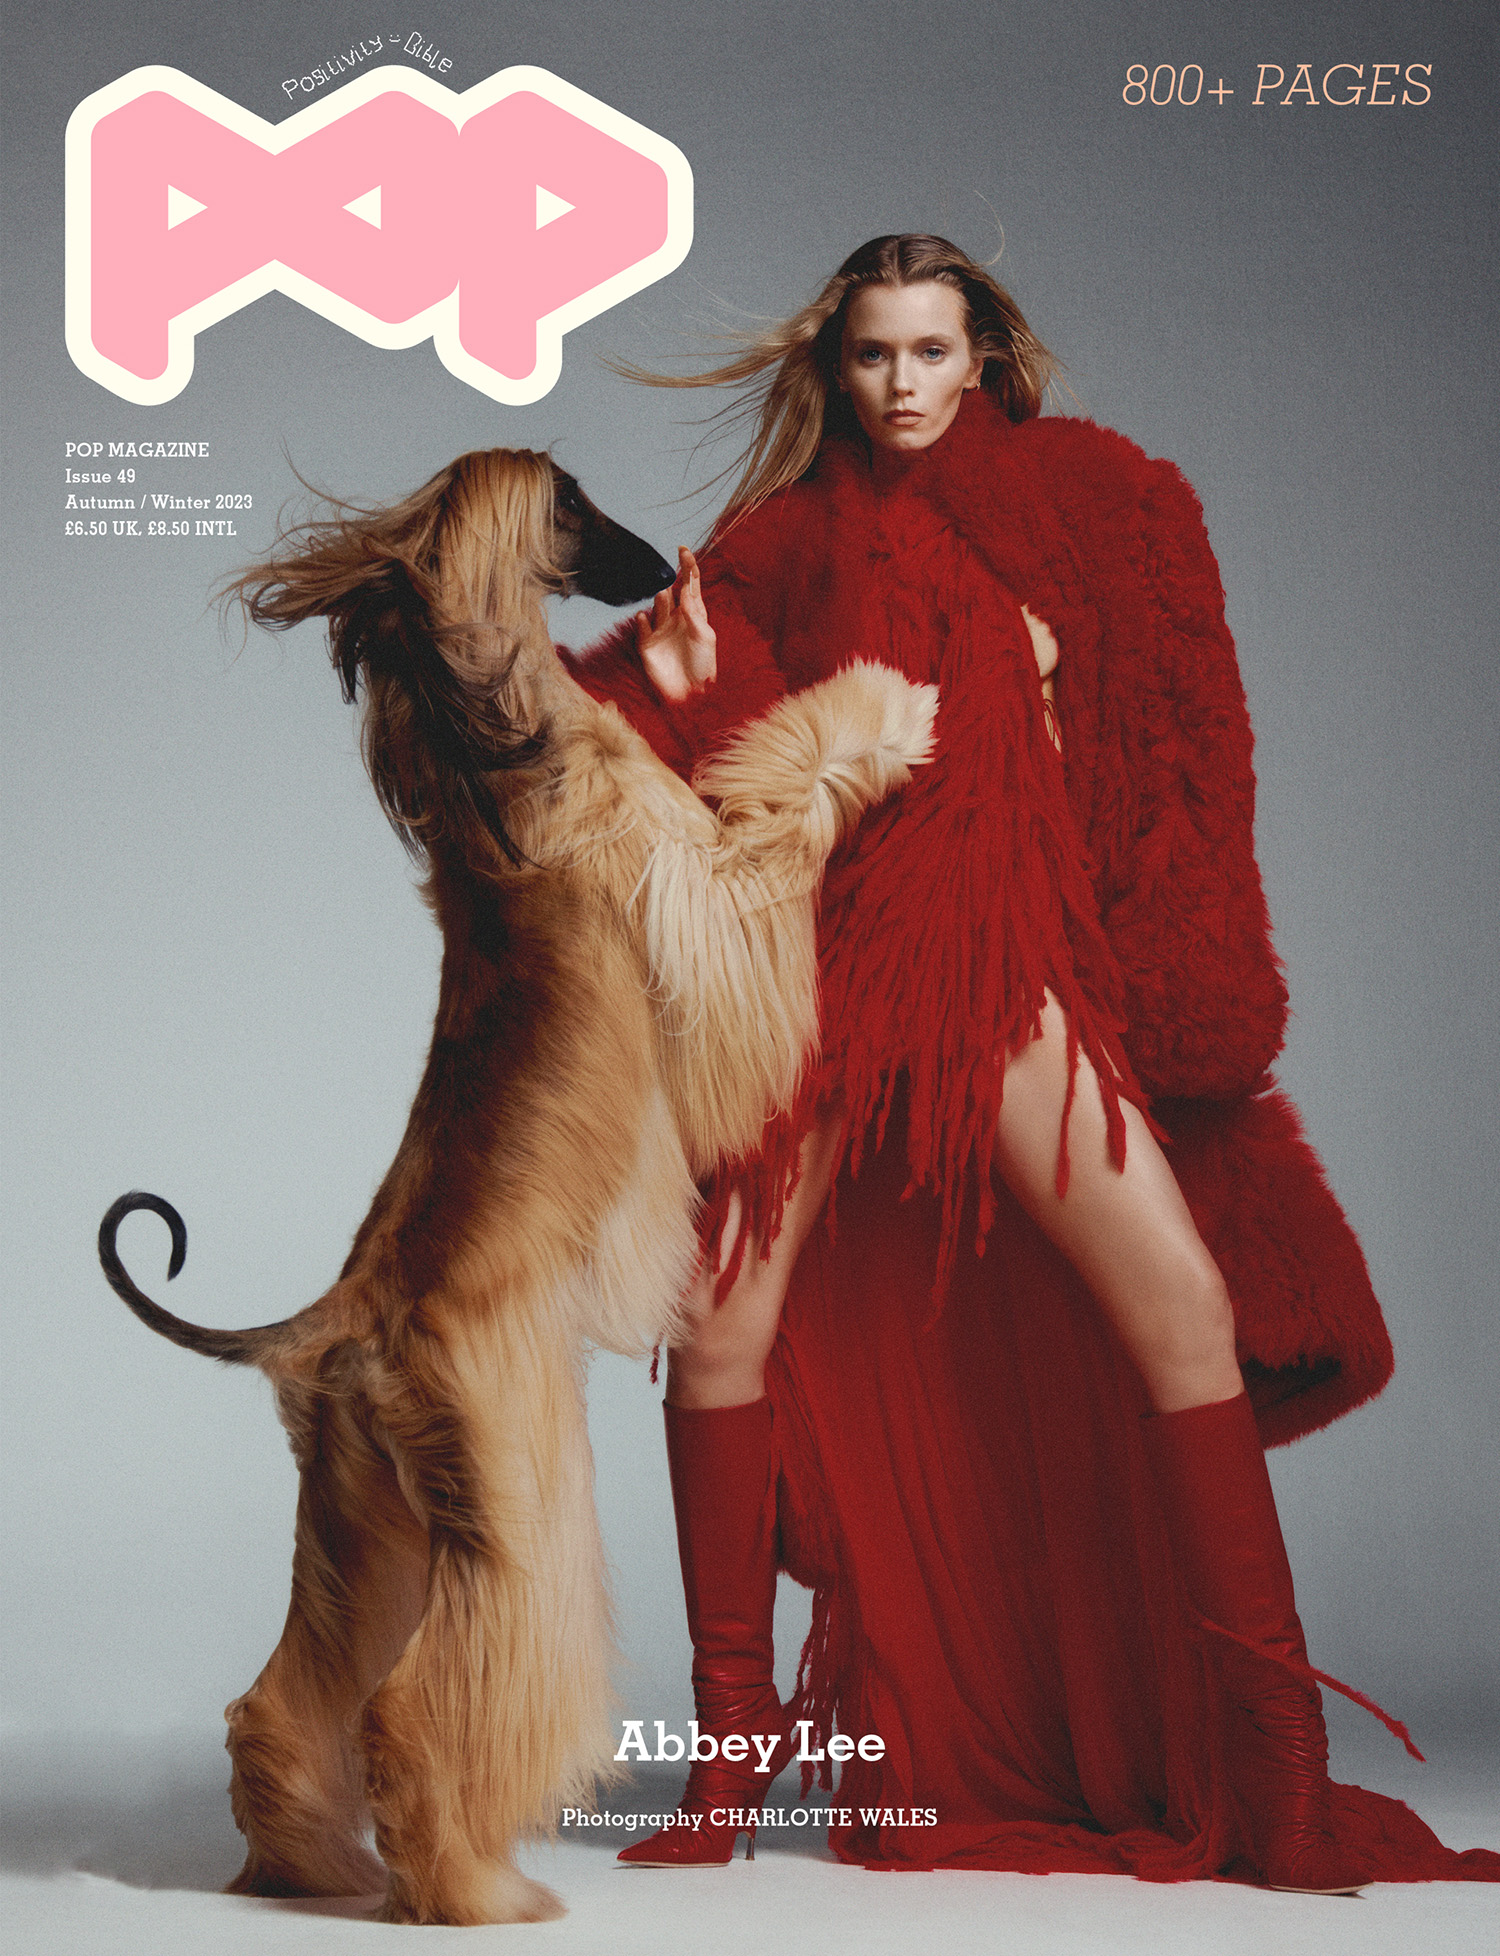 Abbey Lee Kershaw covers POP Magazine Autumn-Winter 2023 by Charlotte Wales